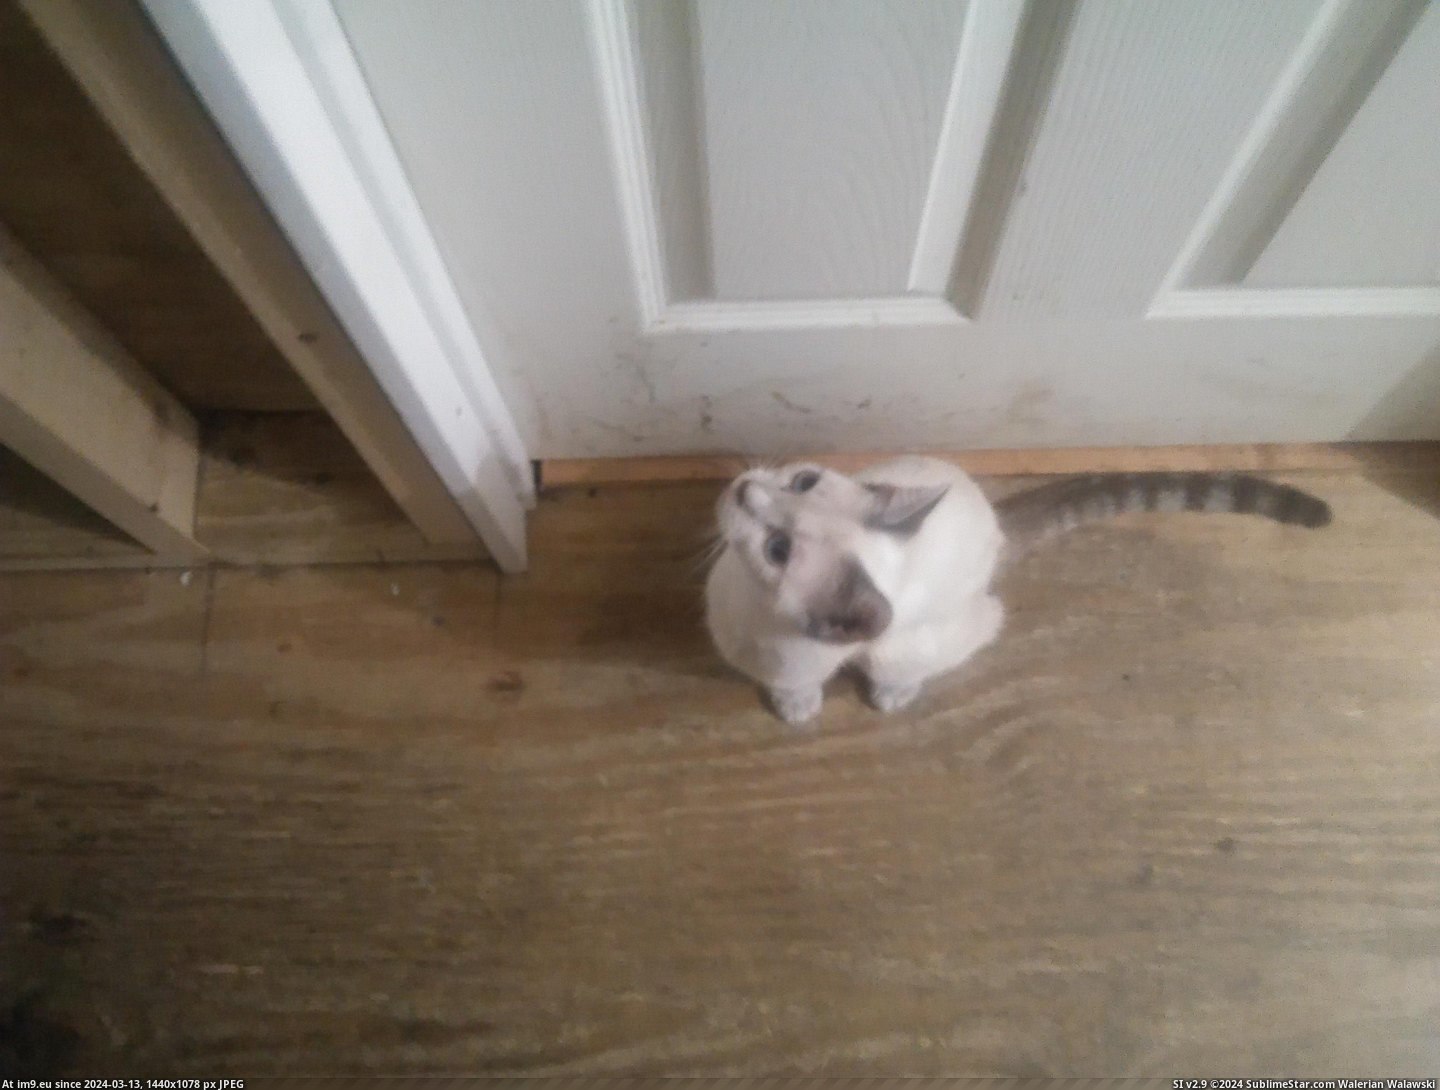 #Cats #Likes #Door #Stretching #Meowing #Sitting #Bedroom #Snowy [Cats] Snowy likes sitting outside of my bedroom door, meowing and stretching at the door until I open the door 5 Pic. (Изображение из альбом My r/CATS favs))